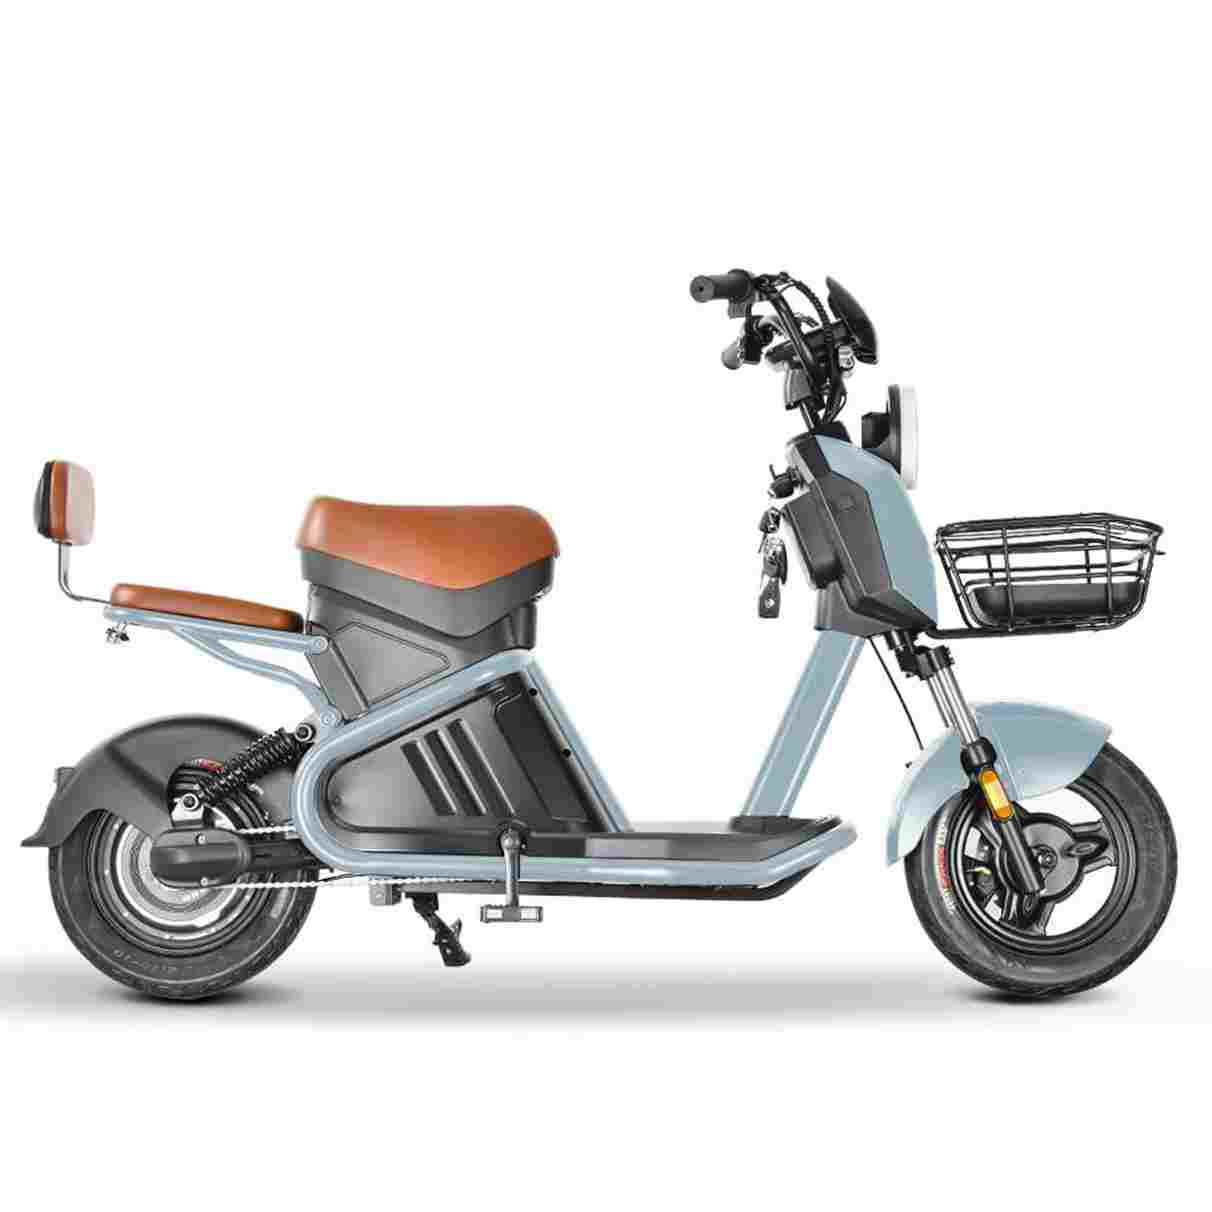 folding mobility scooter